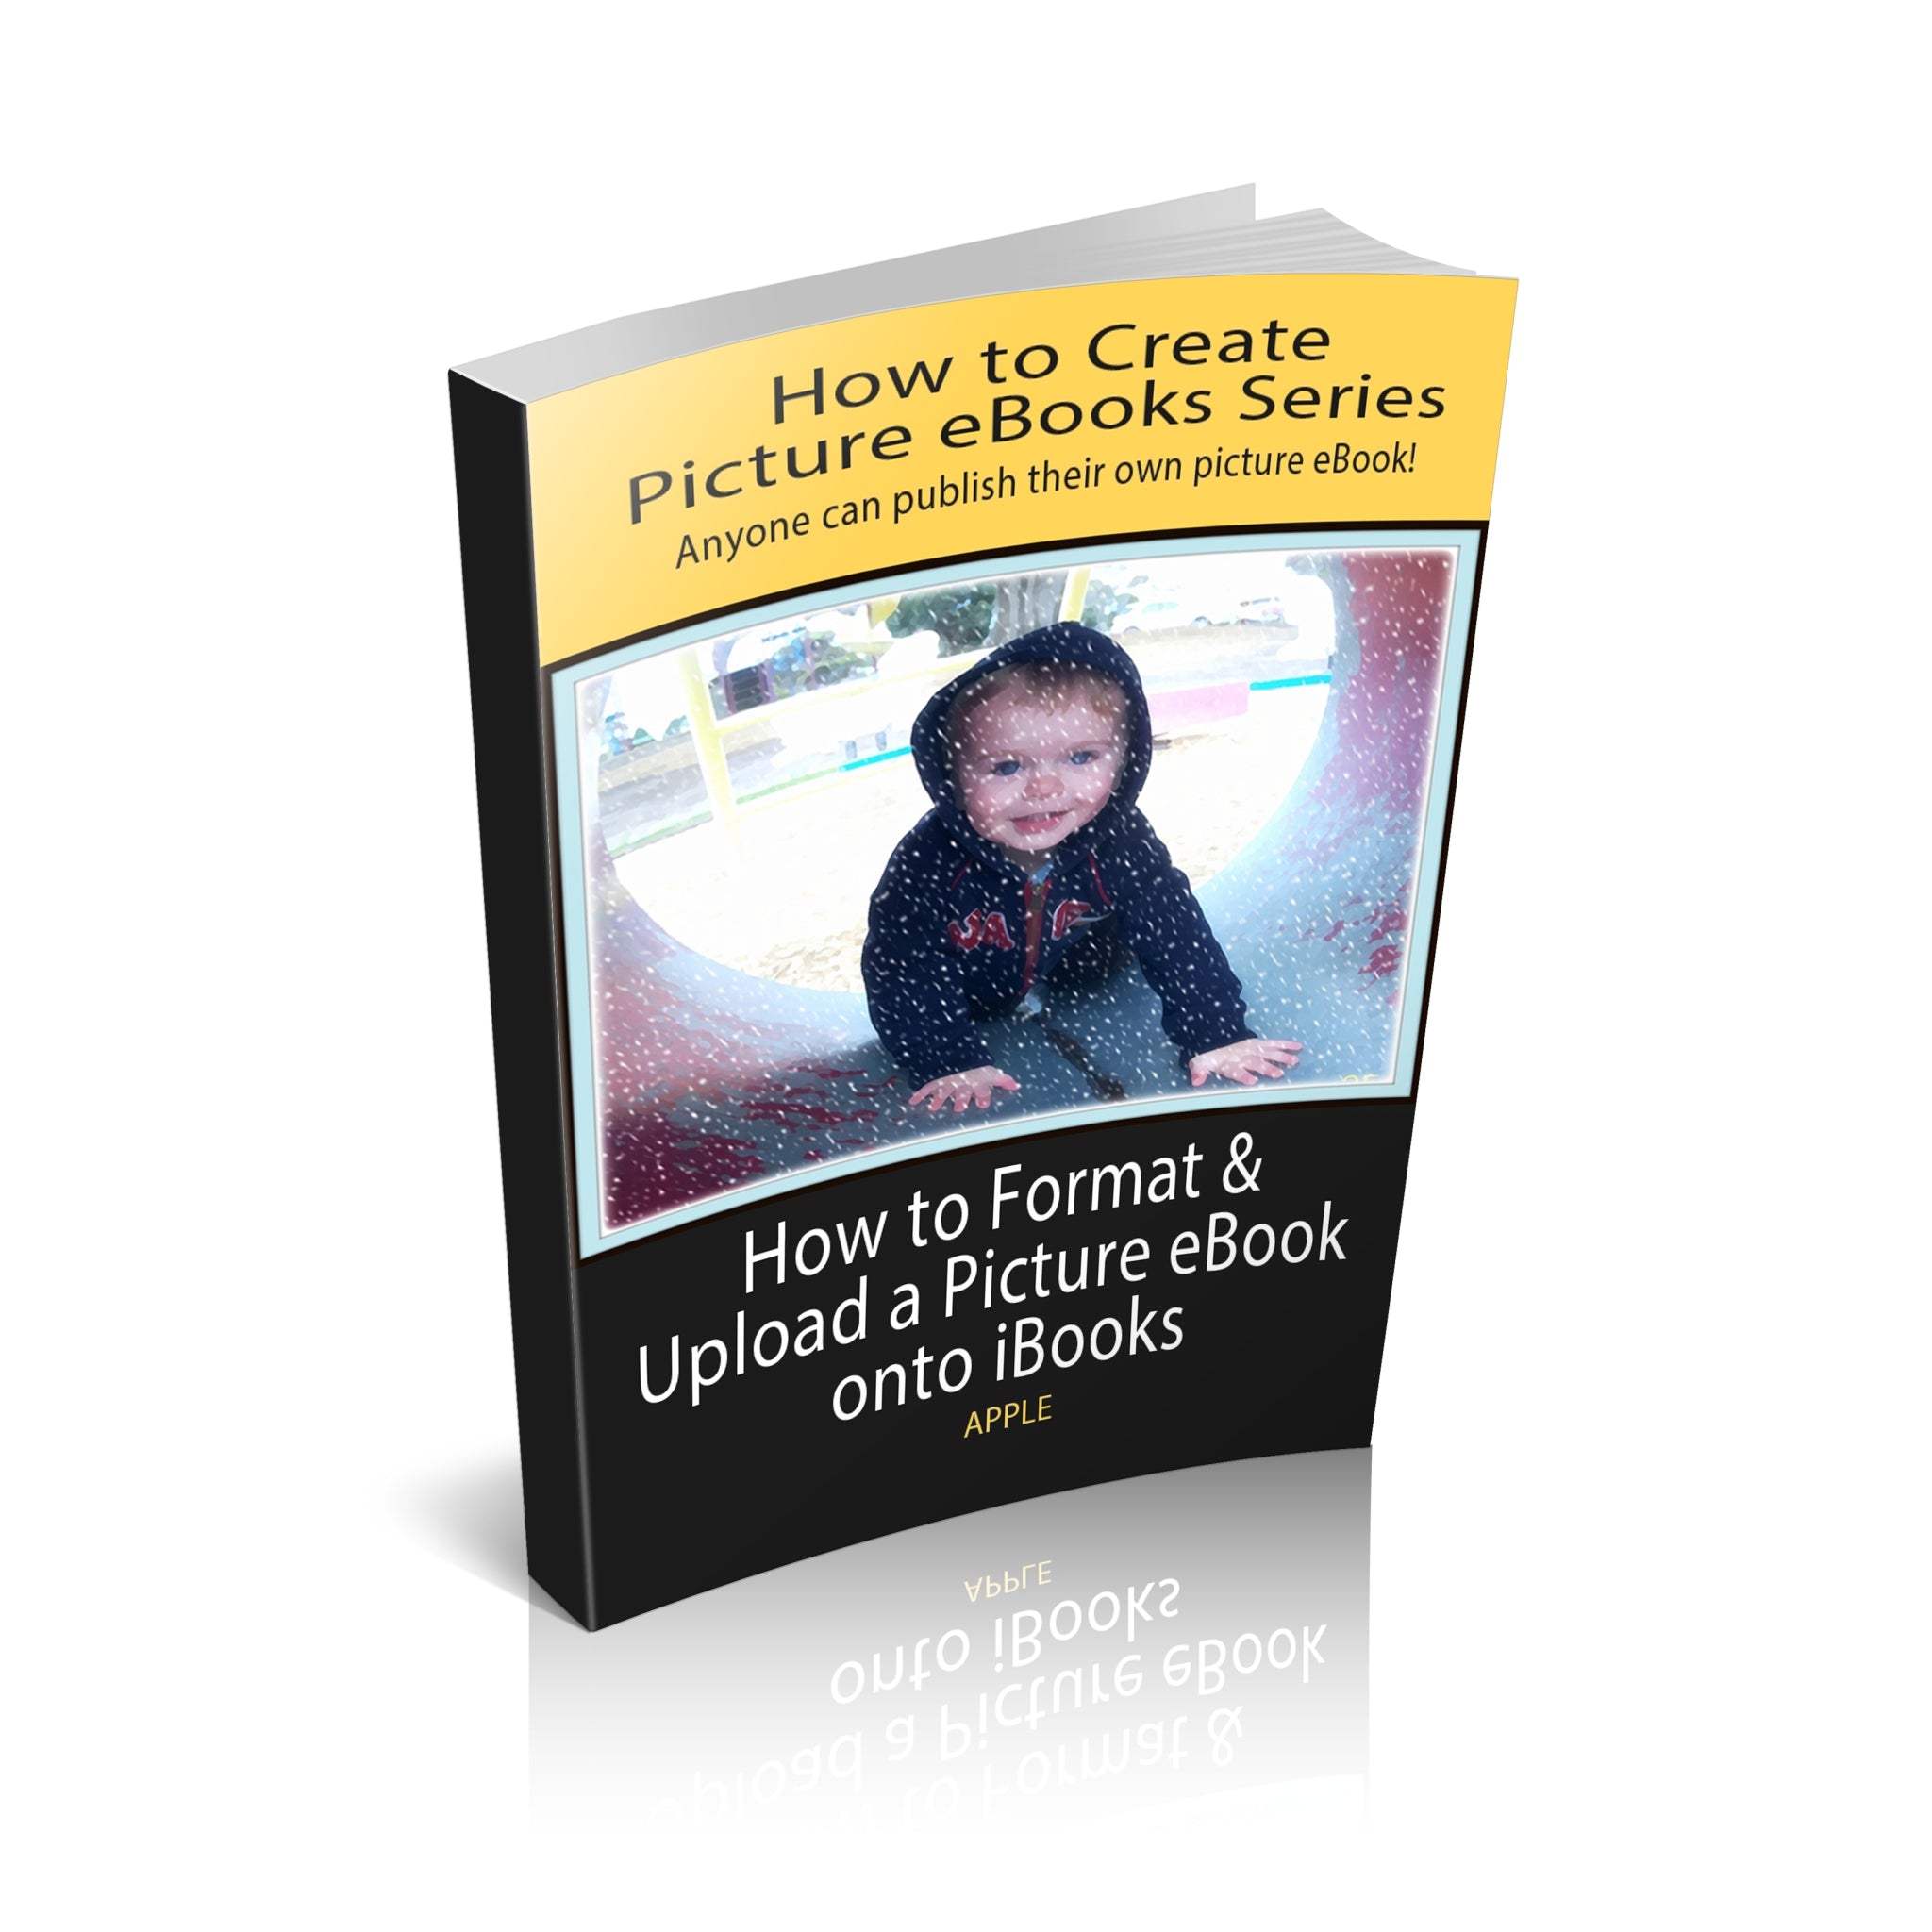 How To Format and Upload a Picture Ebook Onto iBooks Ebook